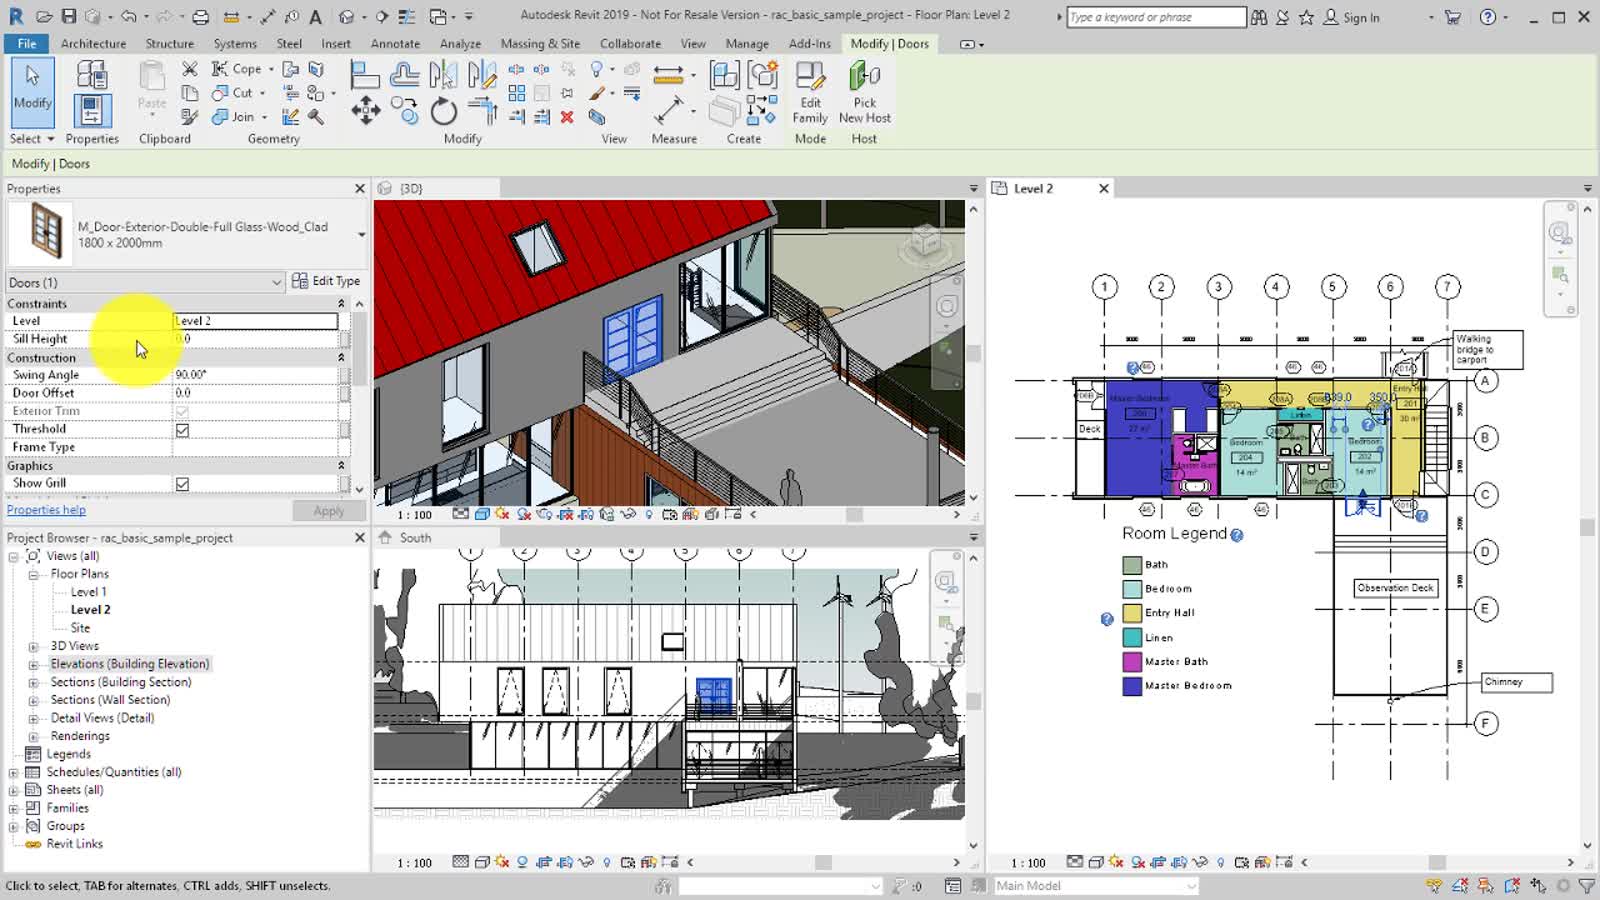 User Interface | Revit Products 2019 | Autodesk Knowledge Network